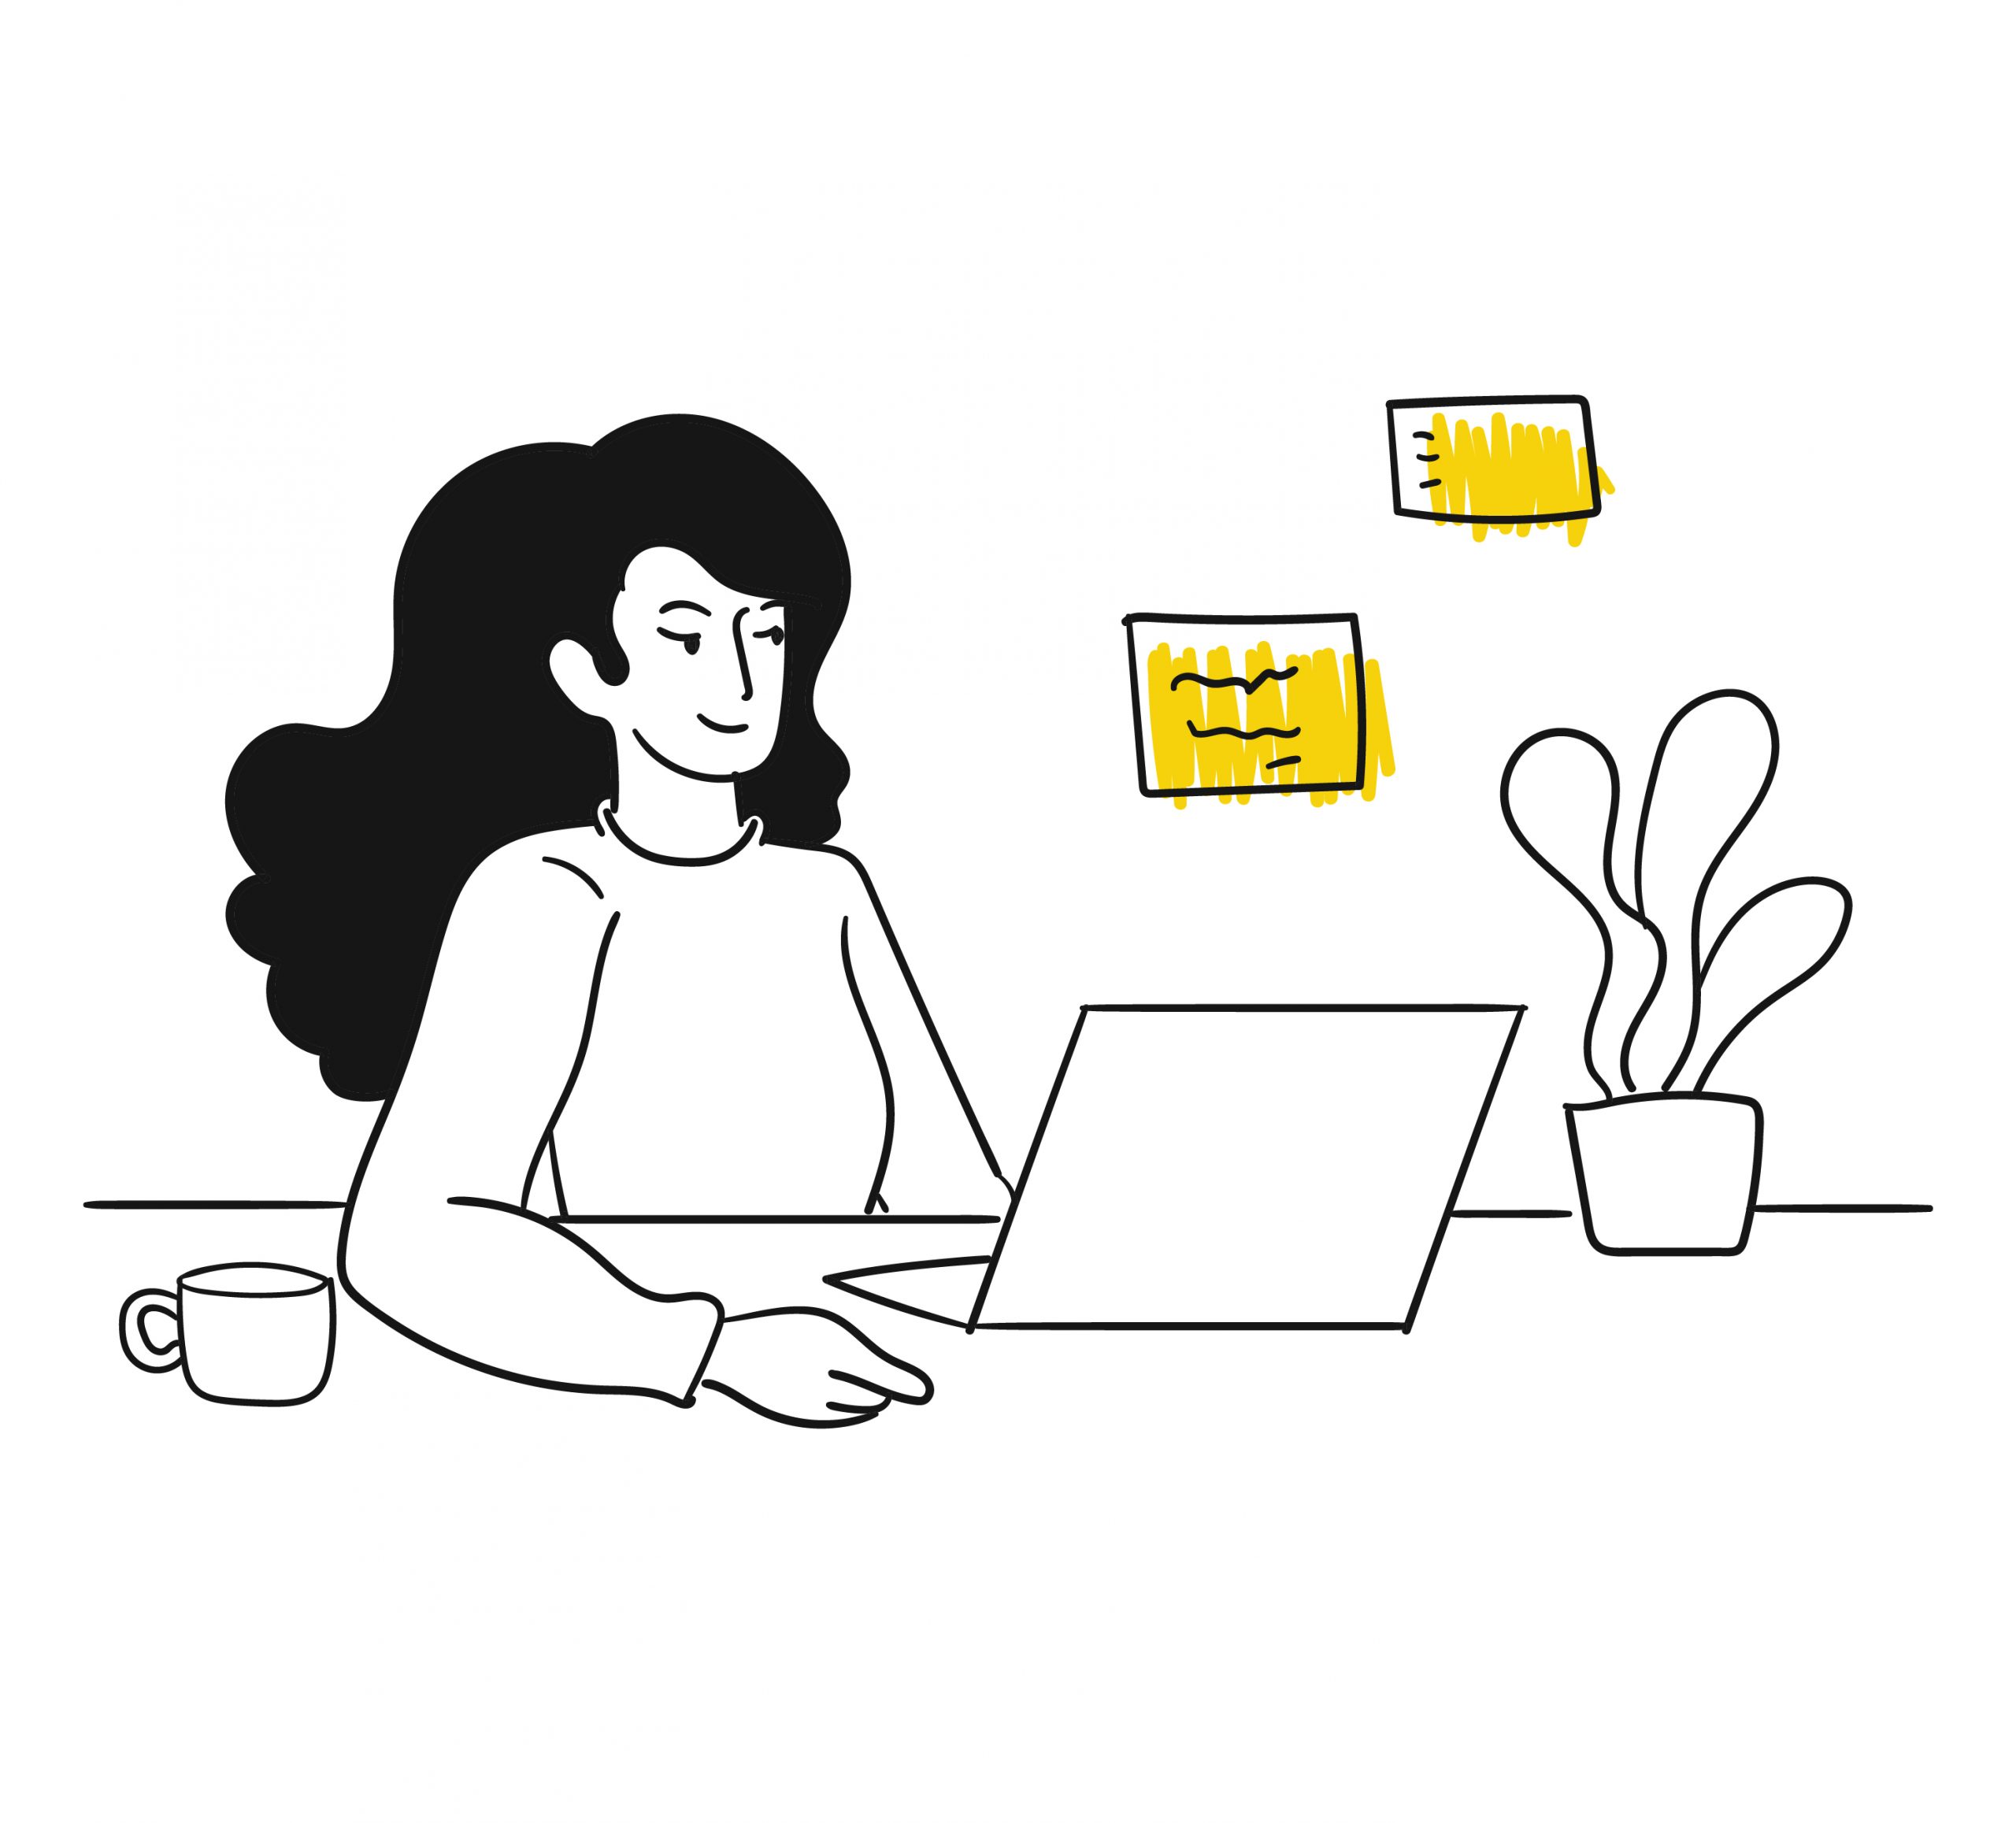 A woman focused on her laptop, surrounded by a yellow sticky note, engrossed in her work.
